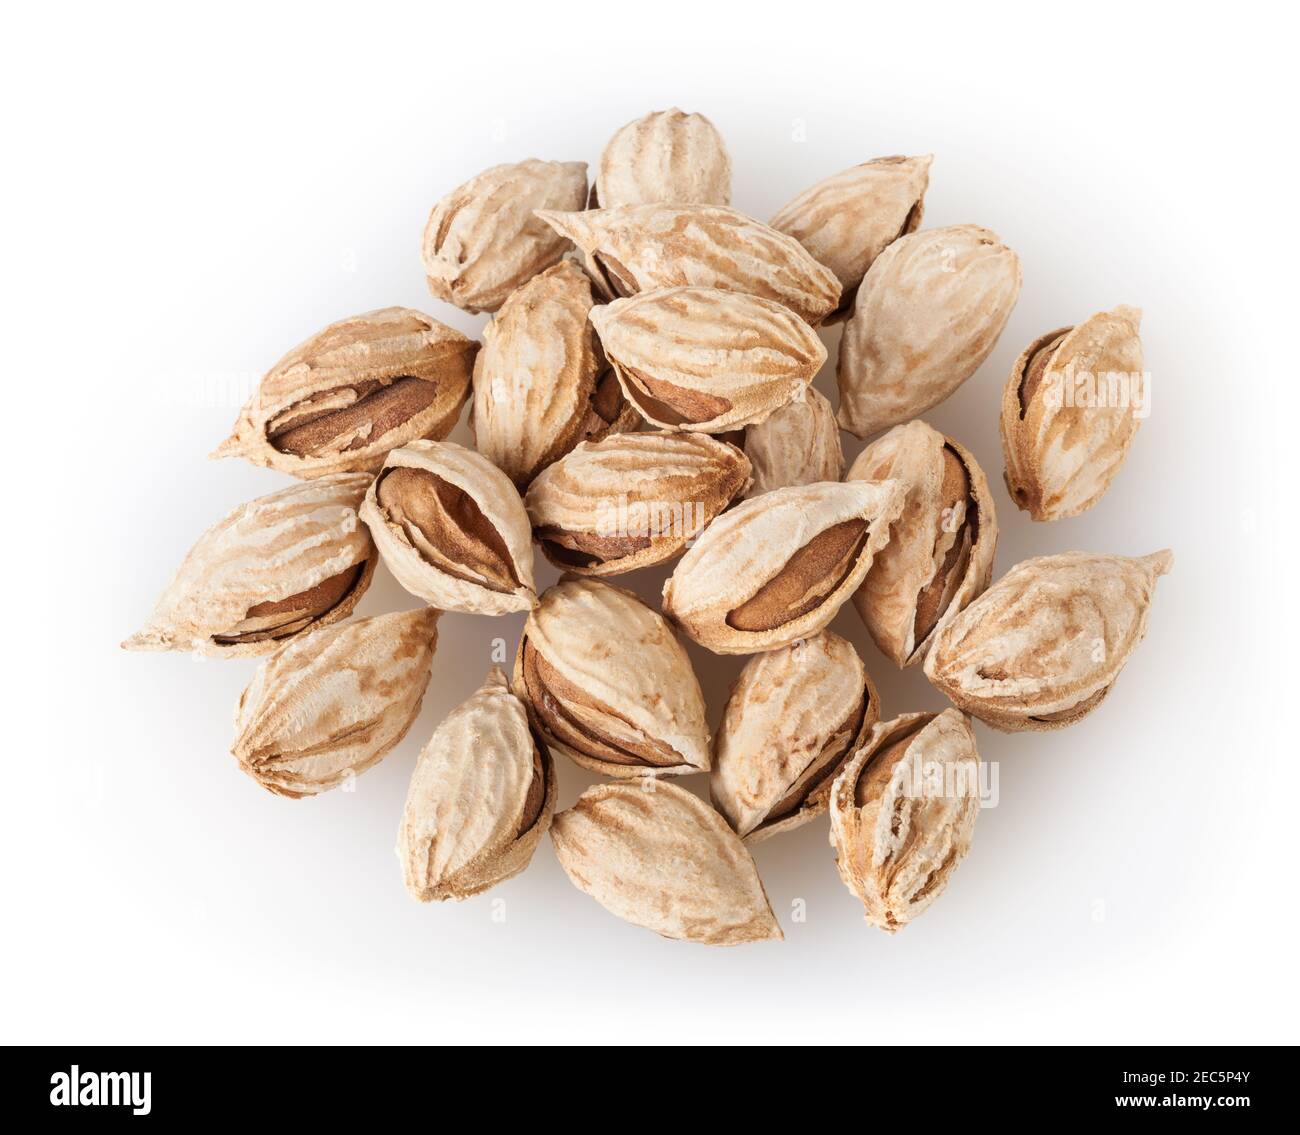 Heap of almond nuts isolated on white background Stock Photo